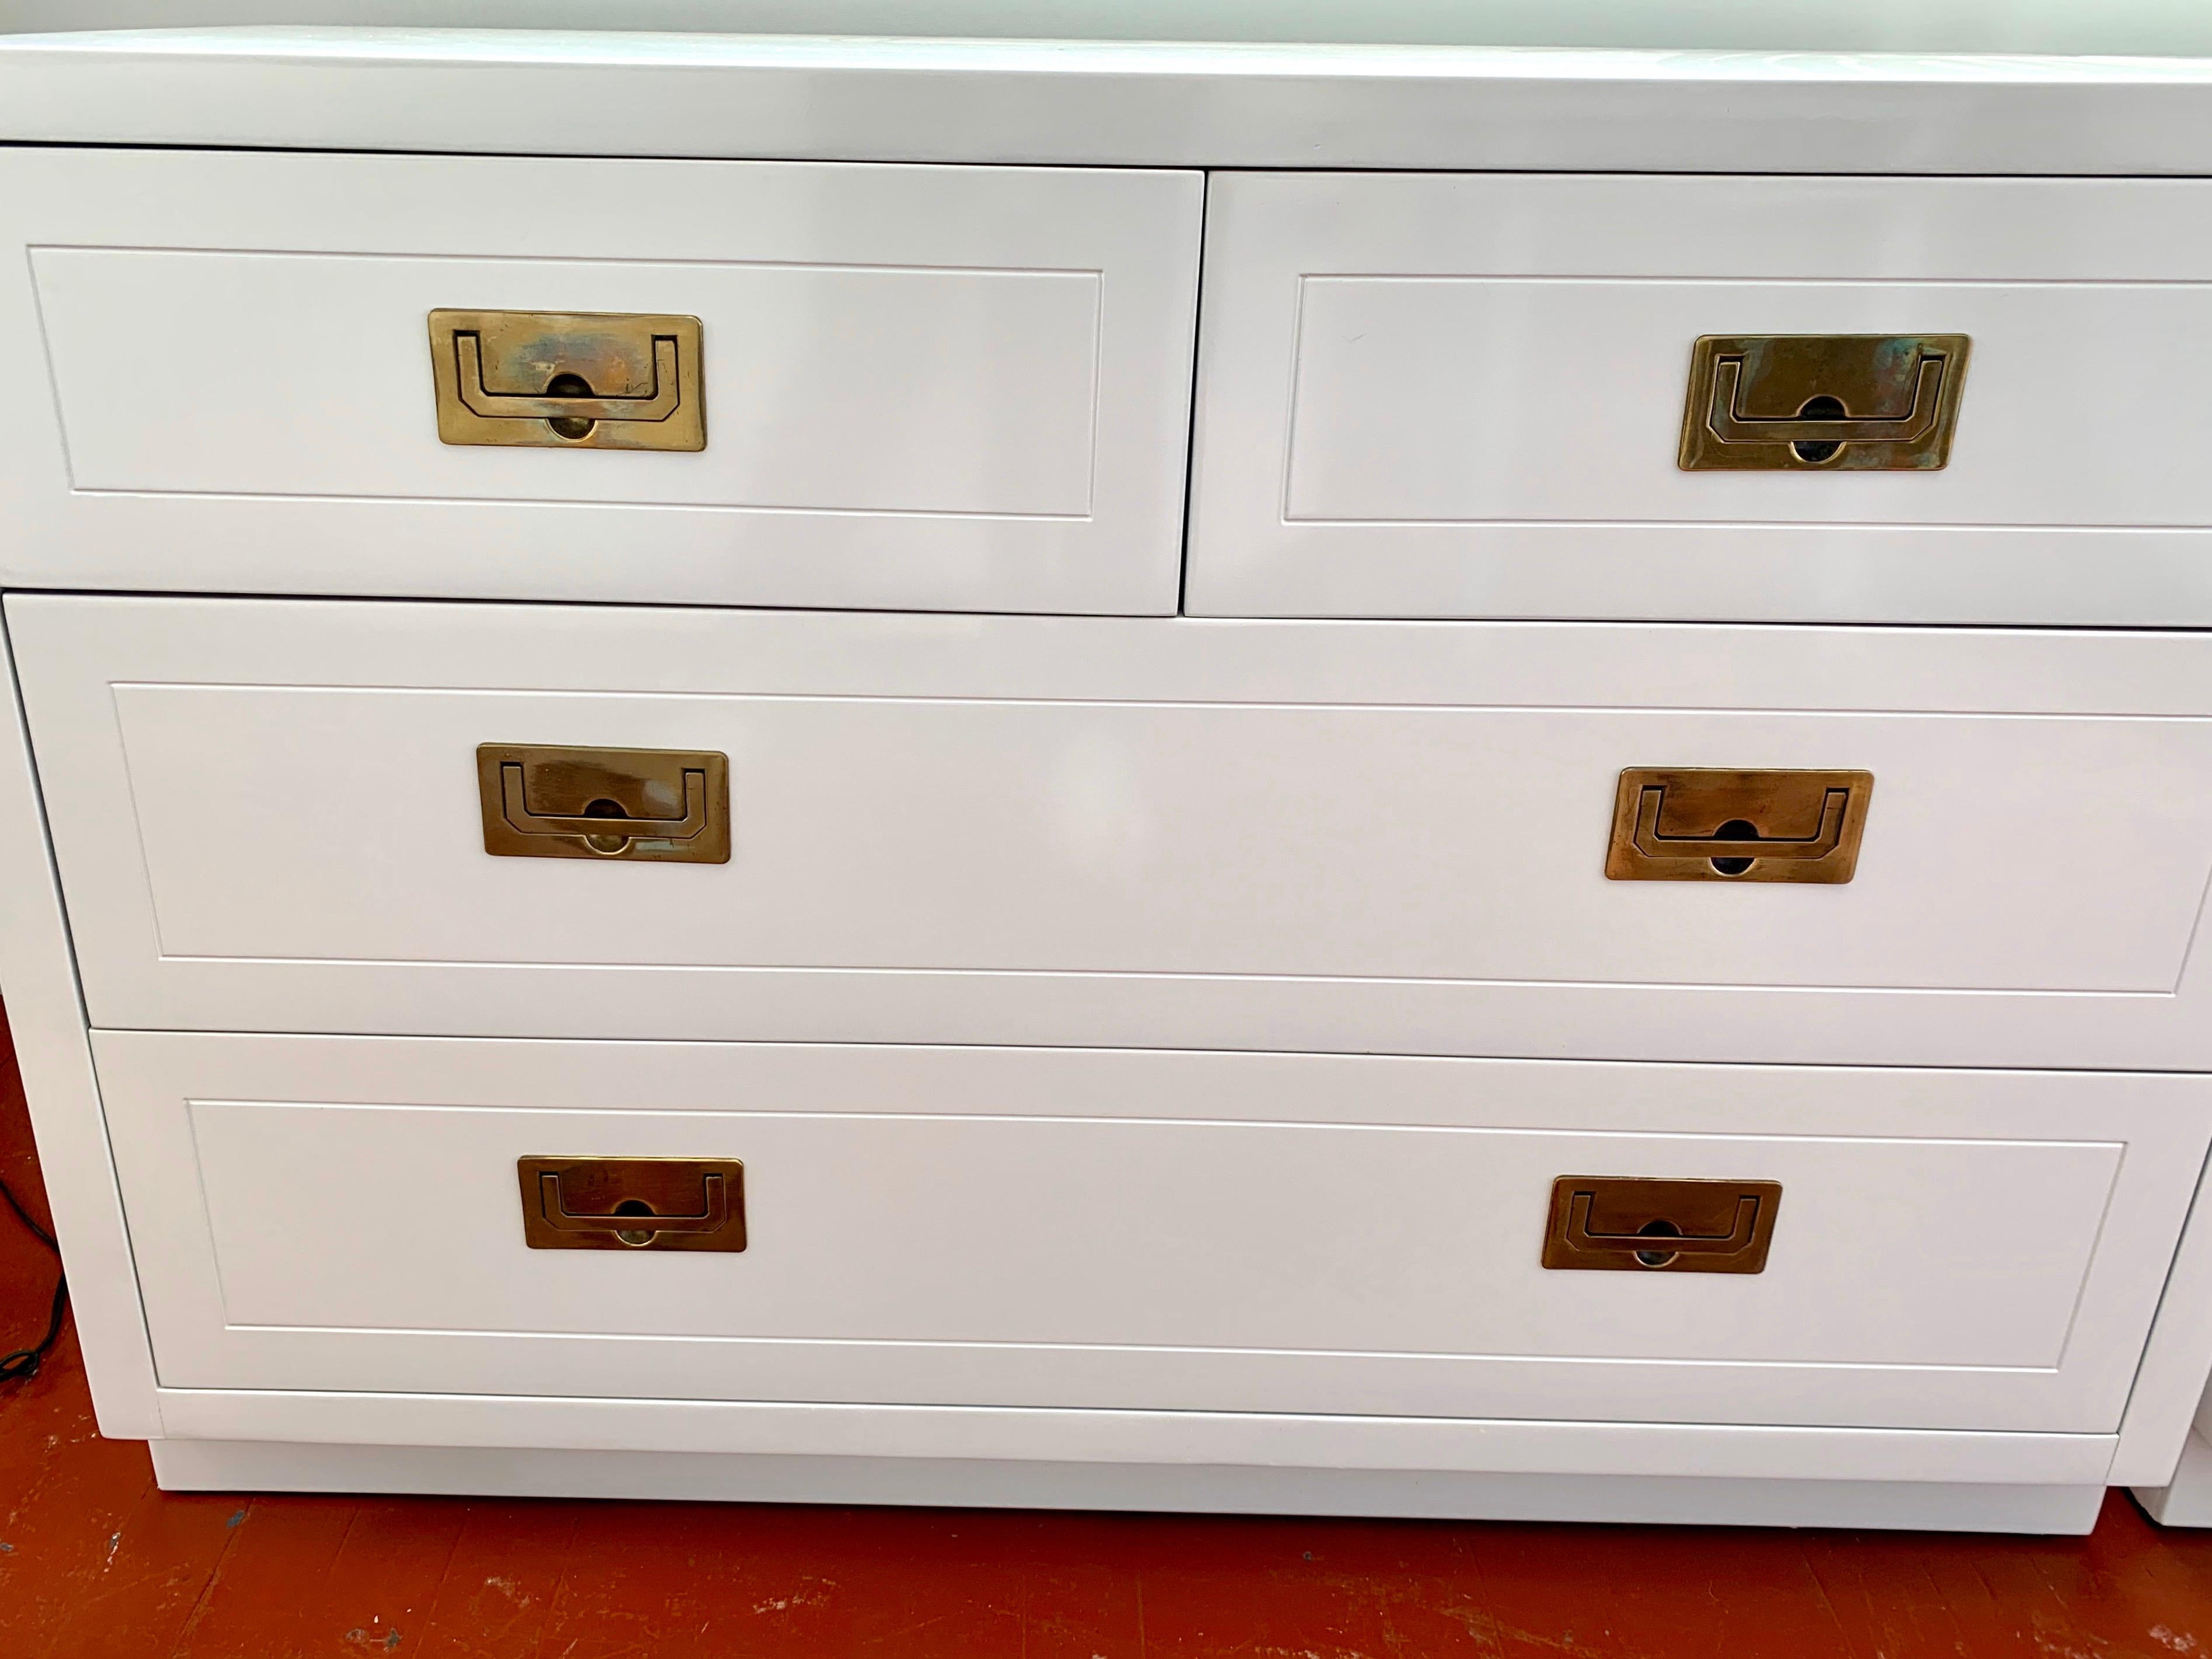 Pair of vintage campaign chests of drawers newly lacquered in white, feature four dovetailed drawers with original recessed brass hardware. Marked “Henredon” inside drawer.